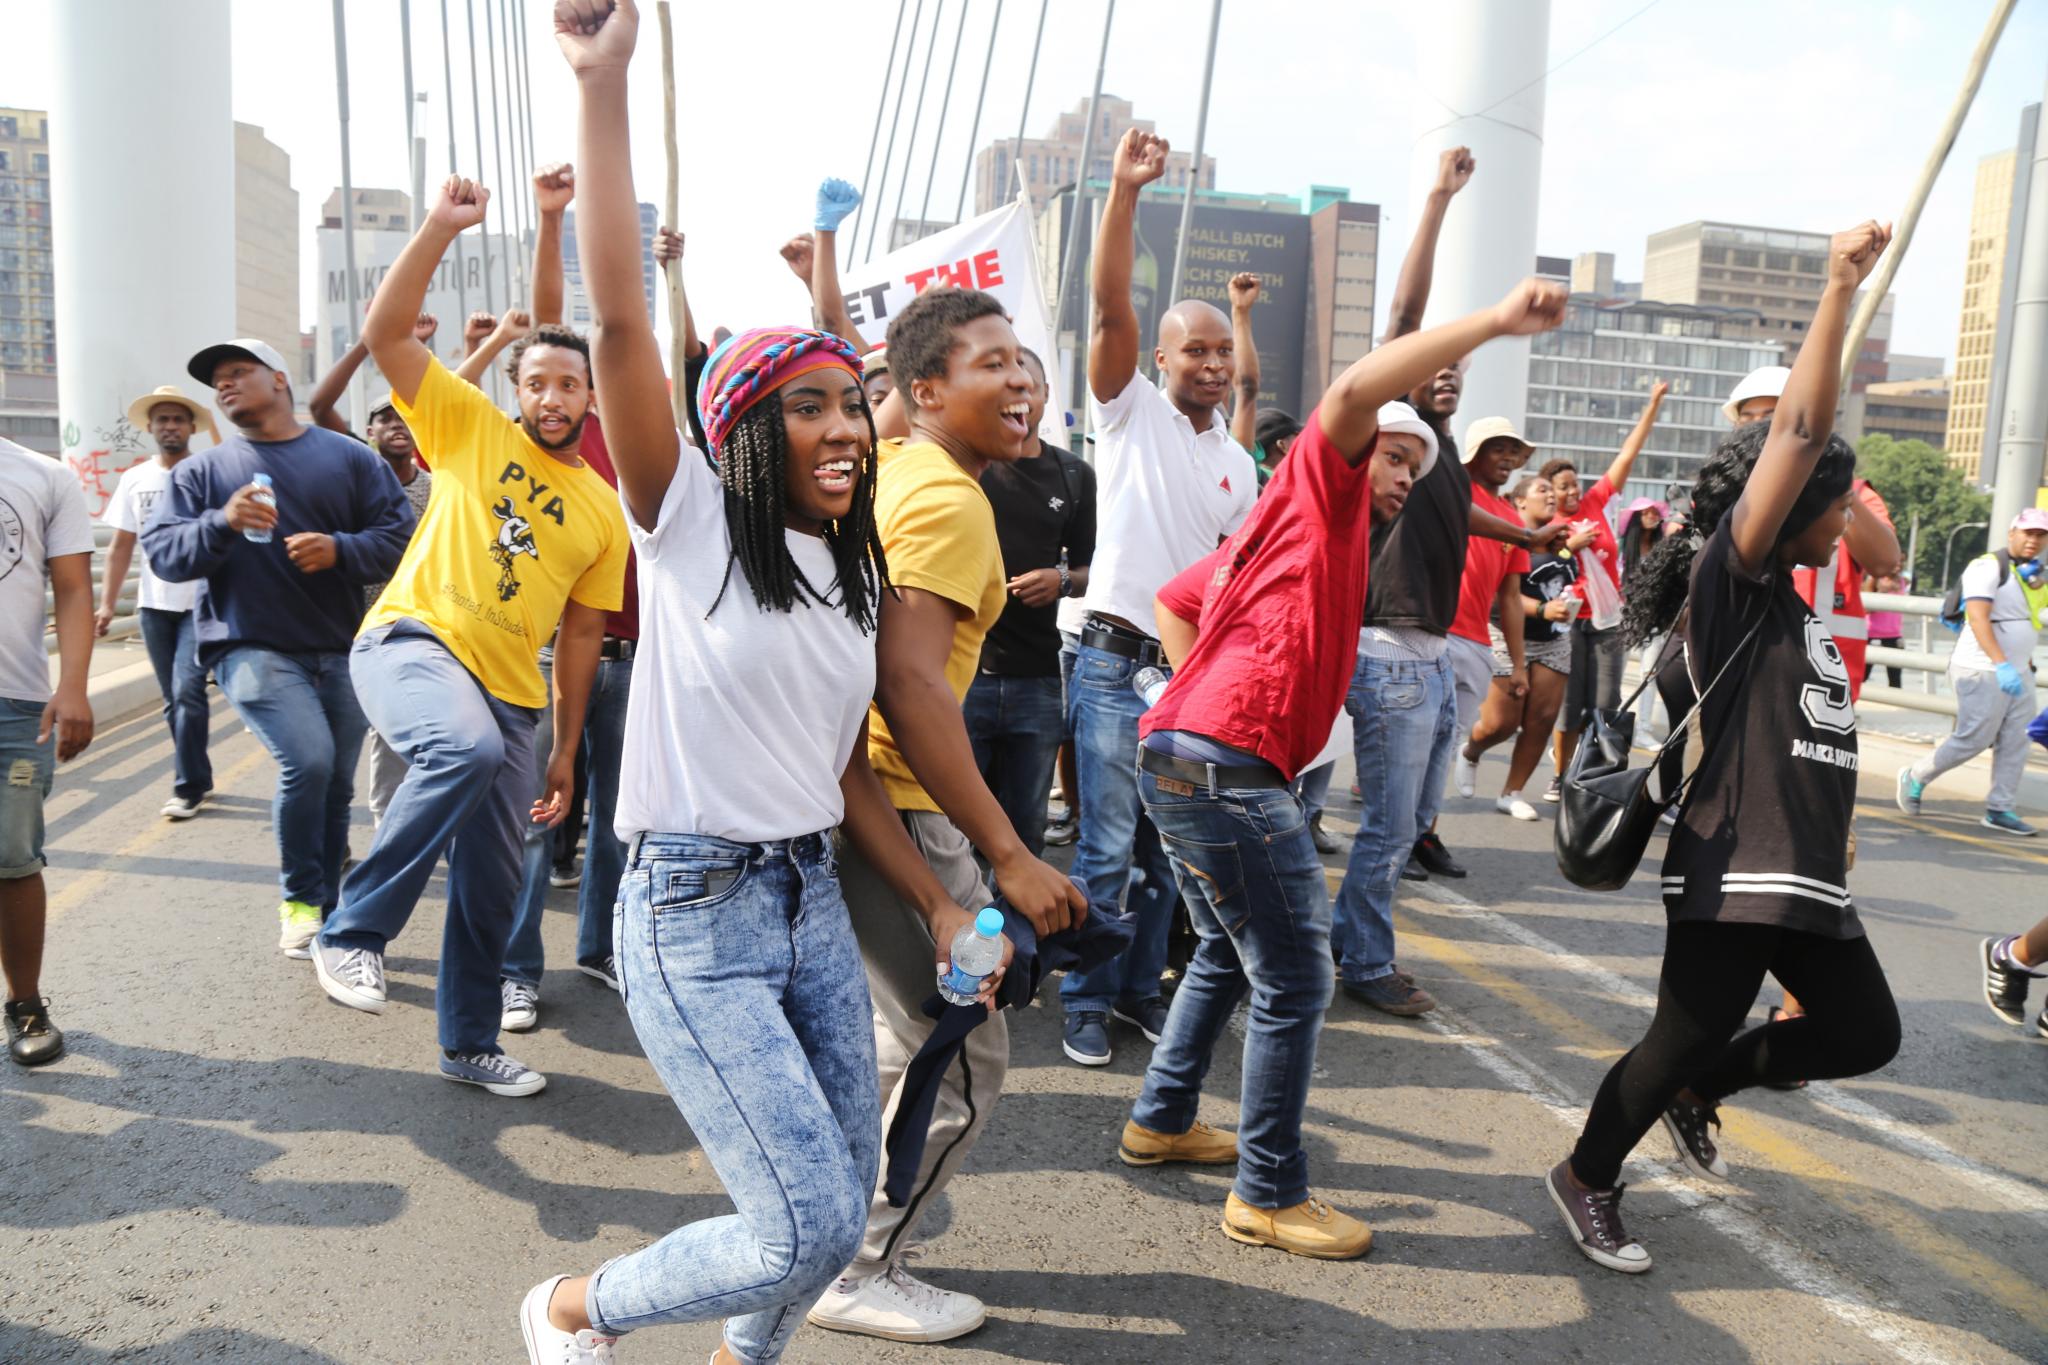 35 Powerful Photos of Student Protests on the Streets of South Africa
